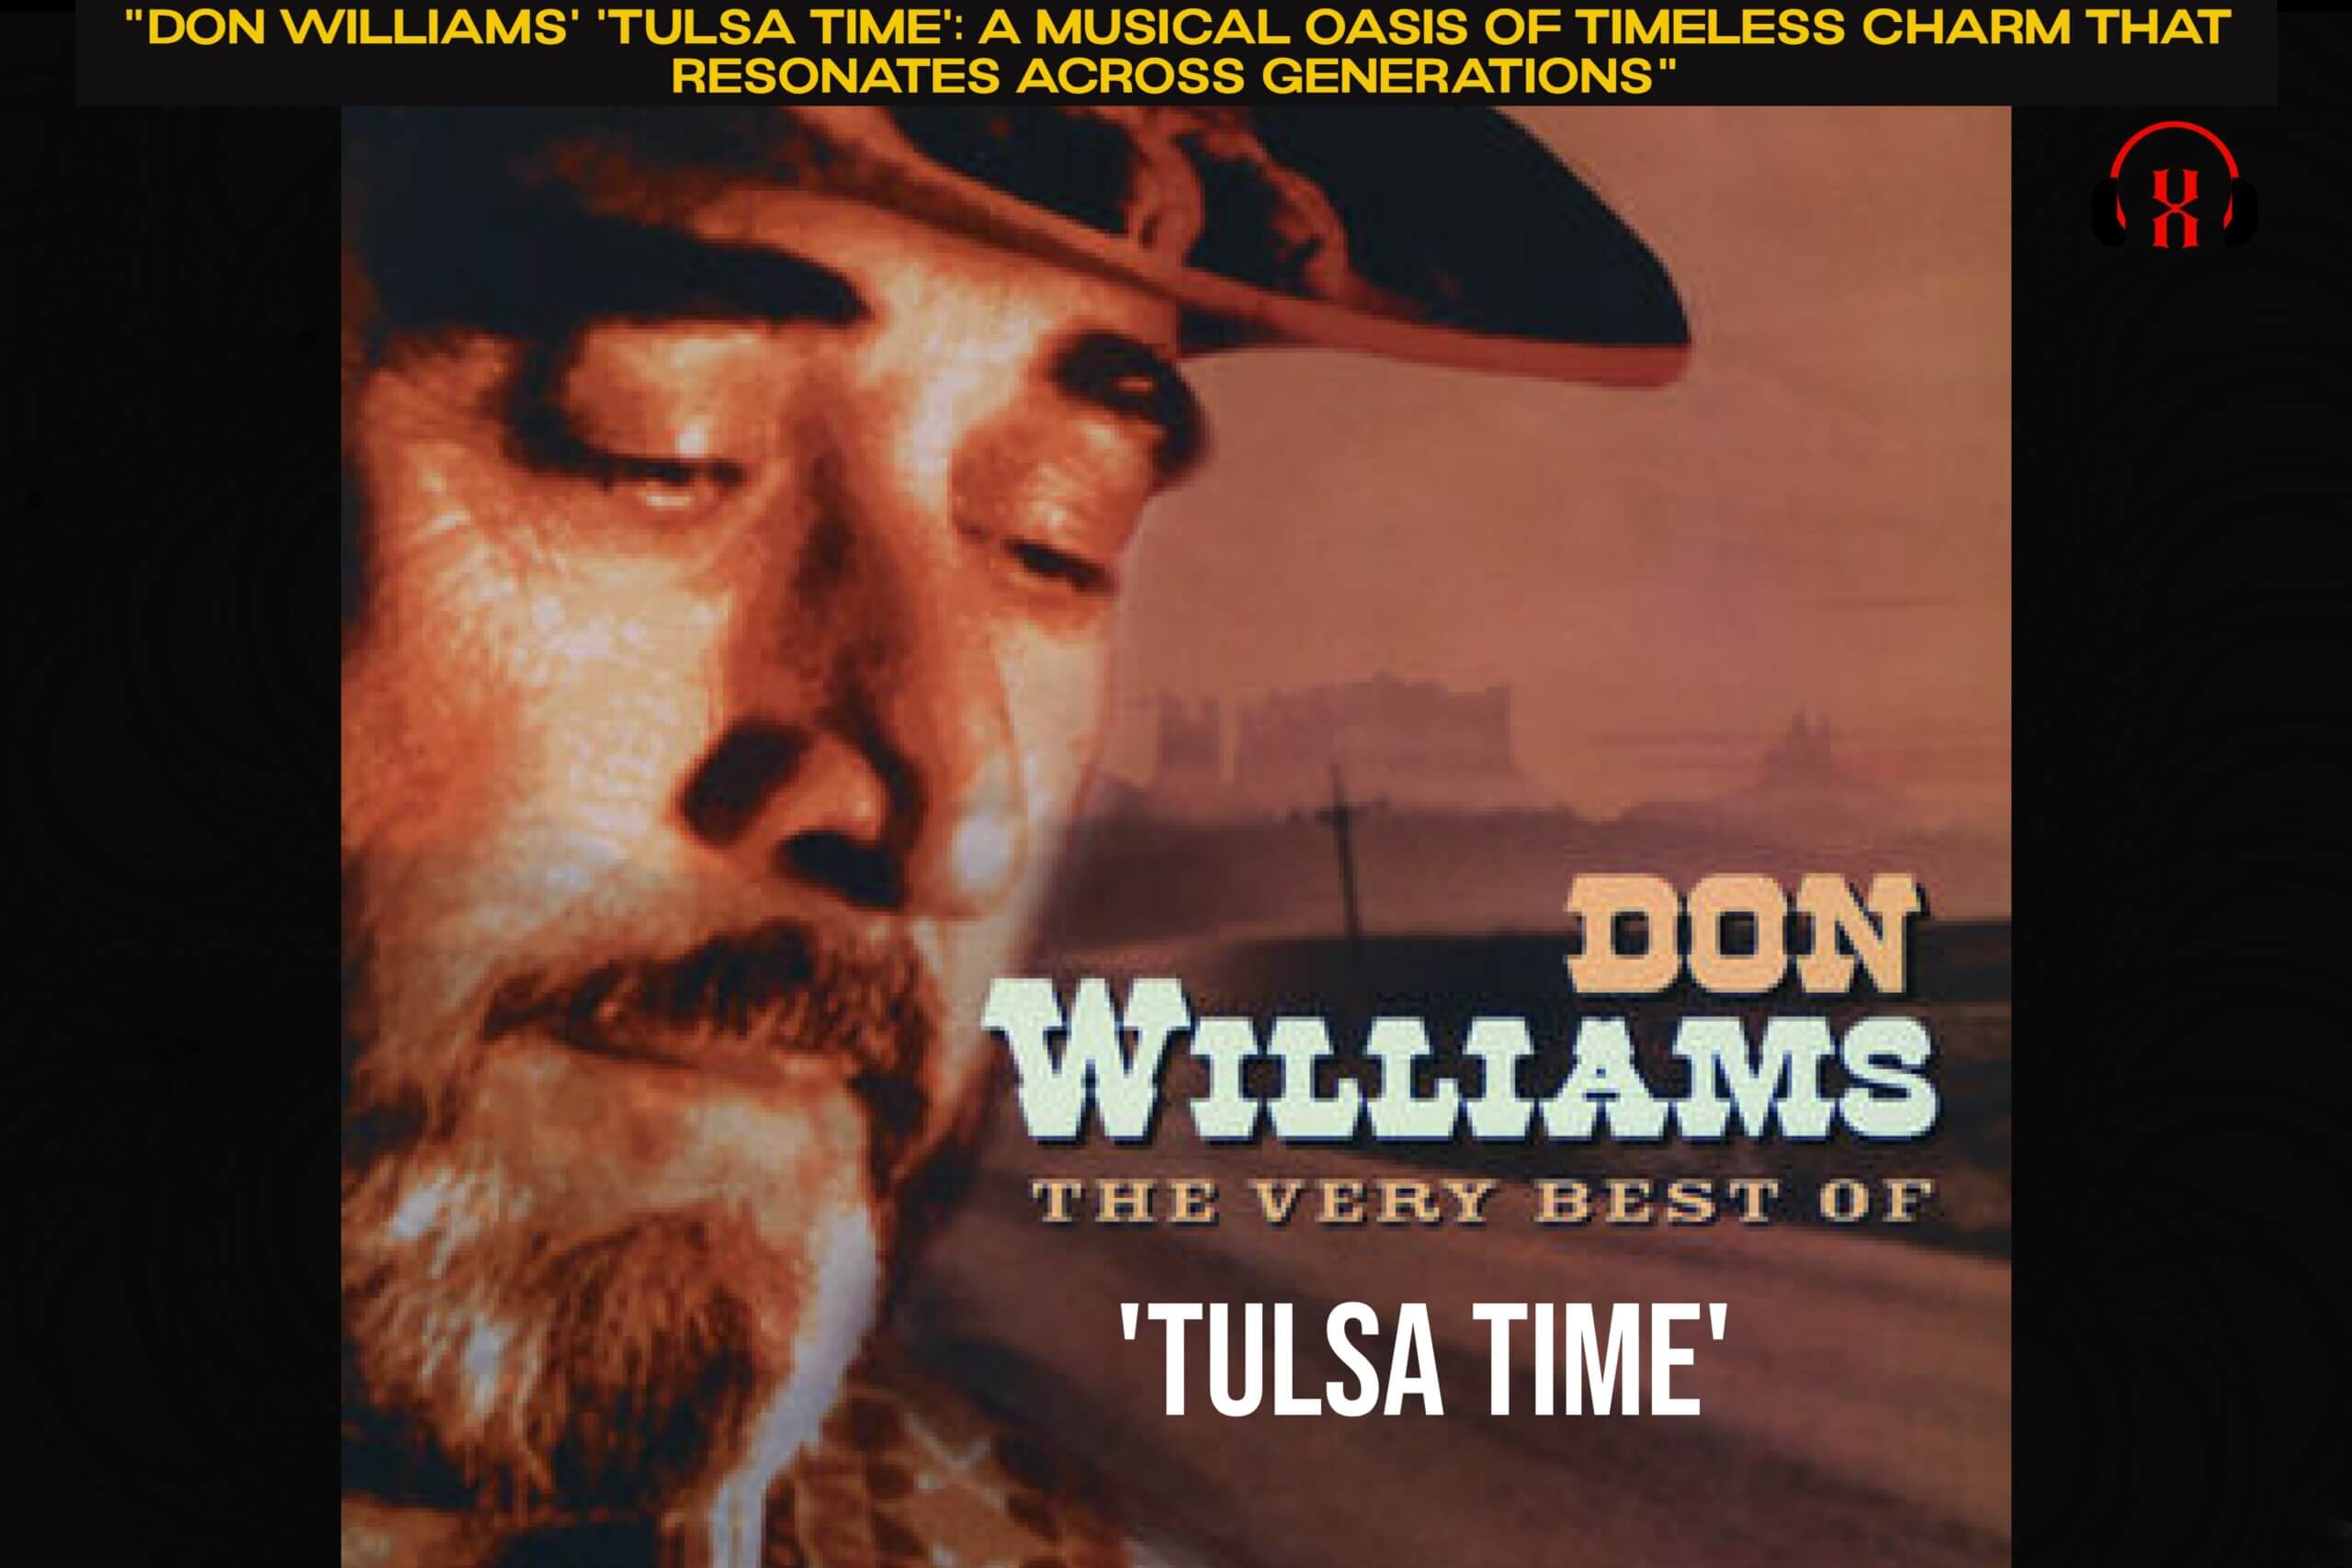 “Don Williams’ ‘Tulsa Time’: A Musical Oasis of Timeless Charm That Resonates Across Generations”